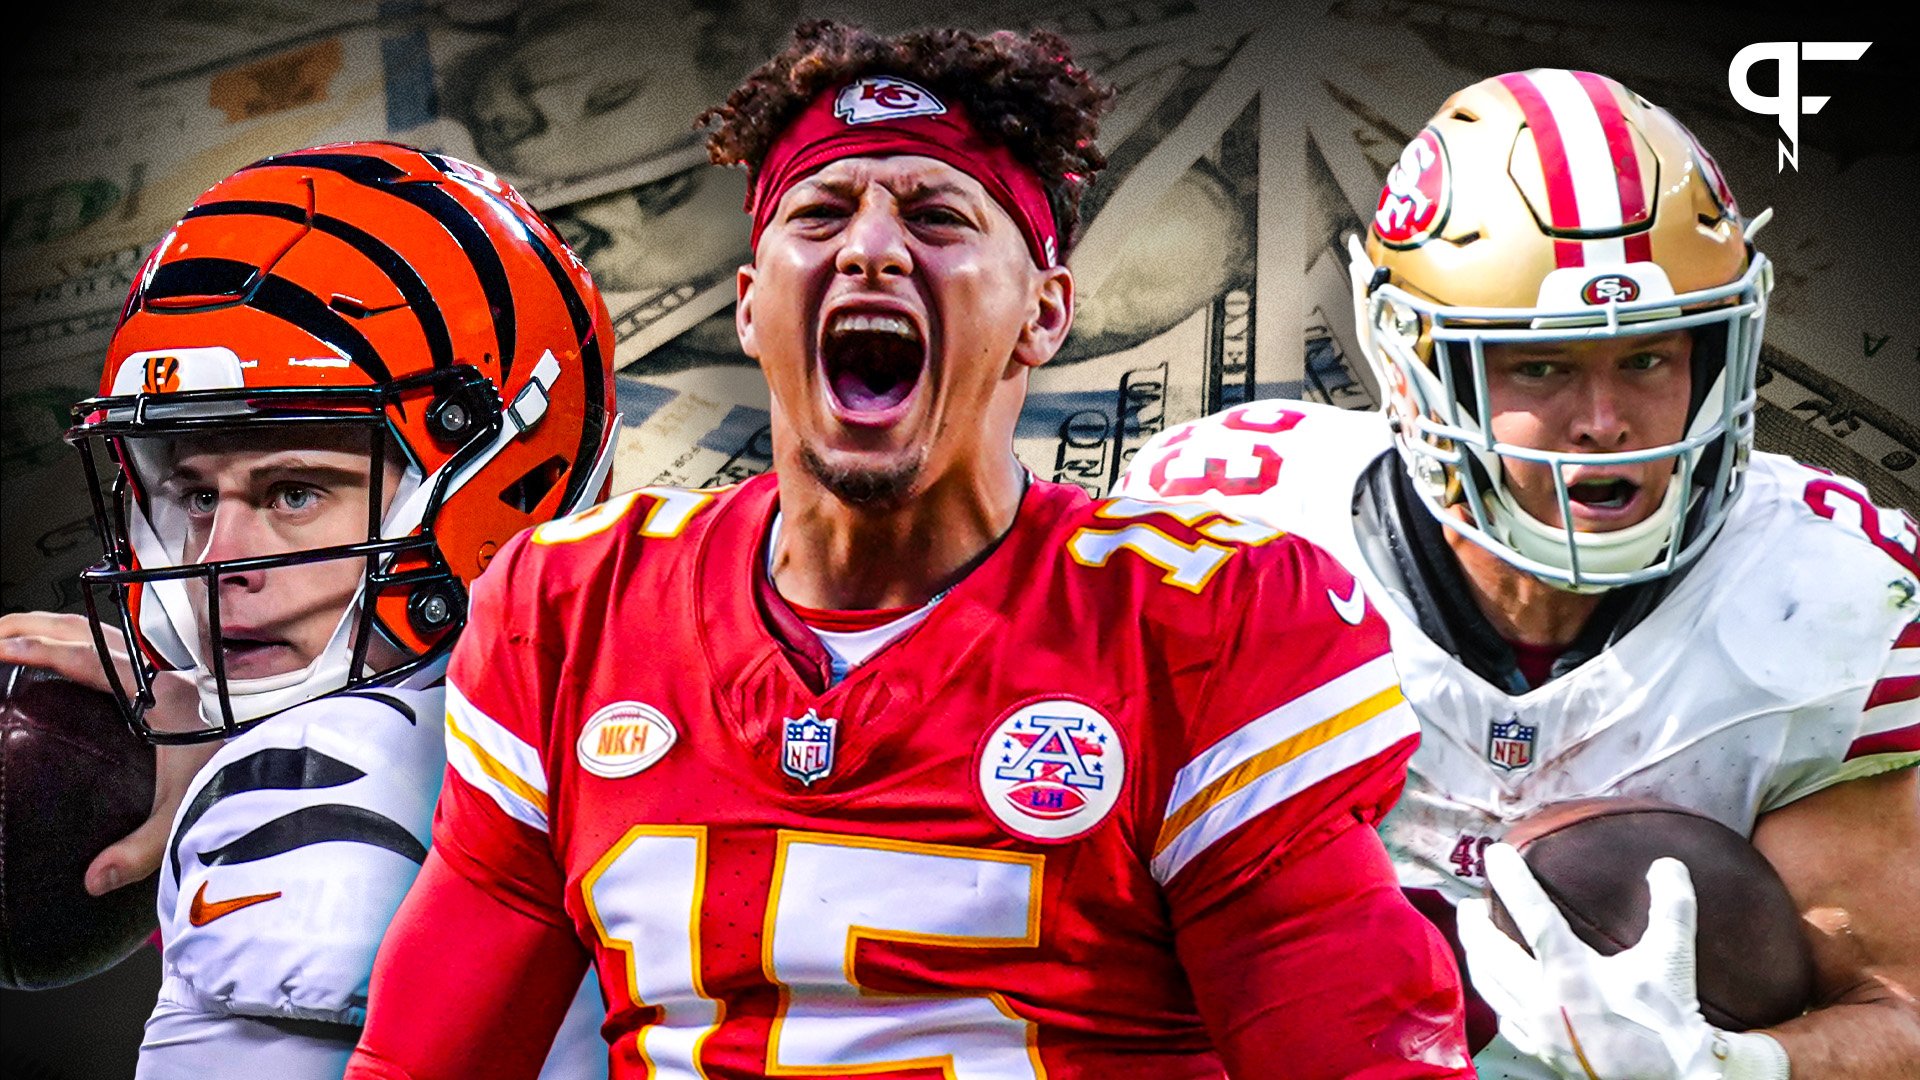 Week 13 NFL best bets: Back the underdogs